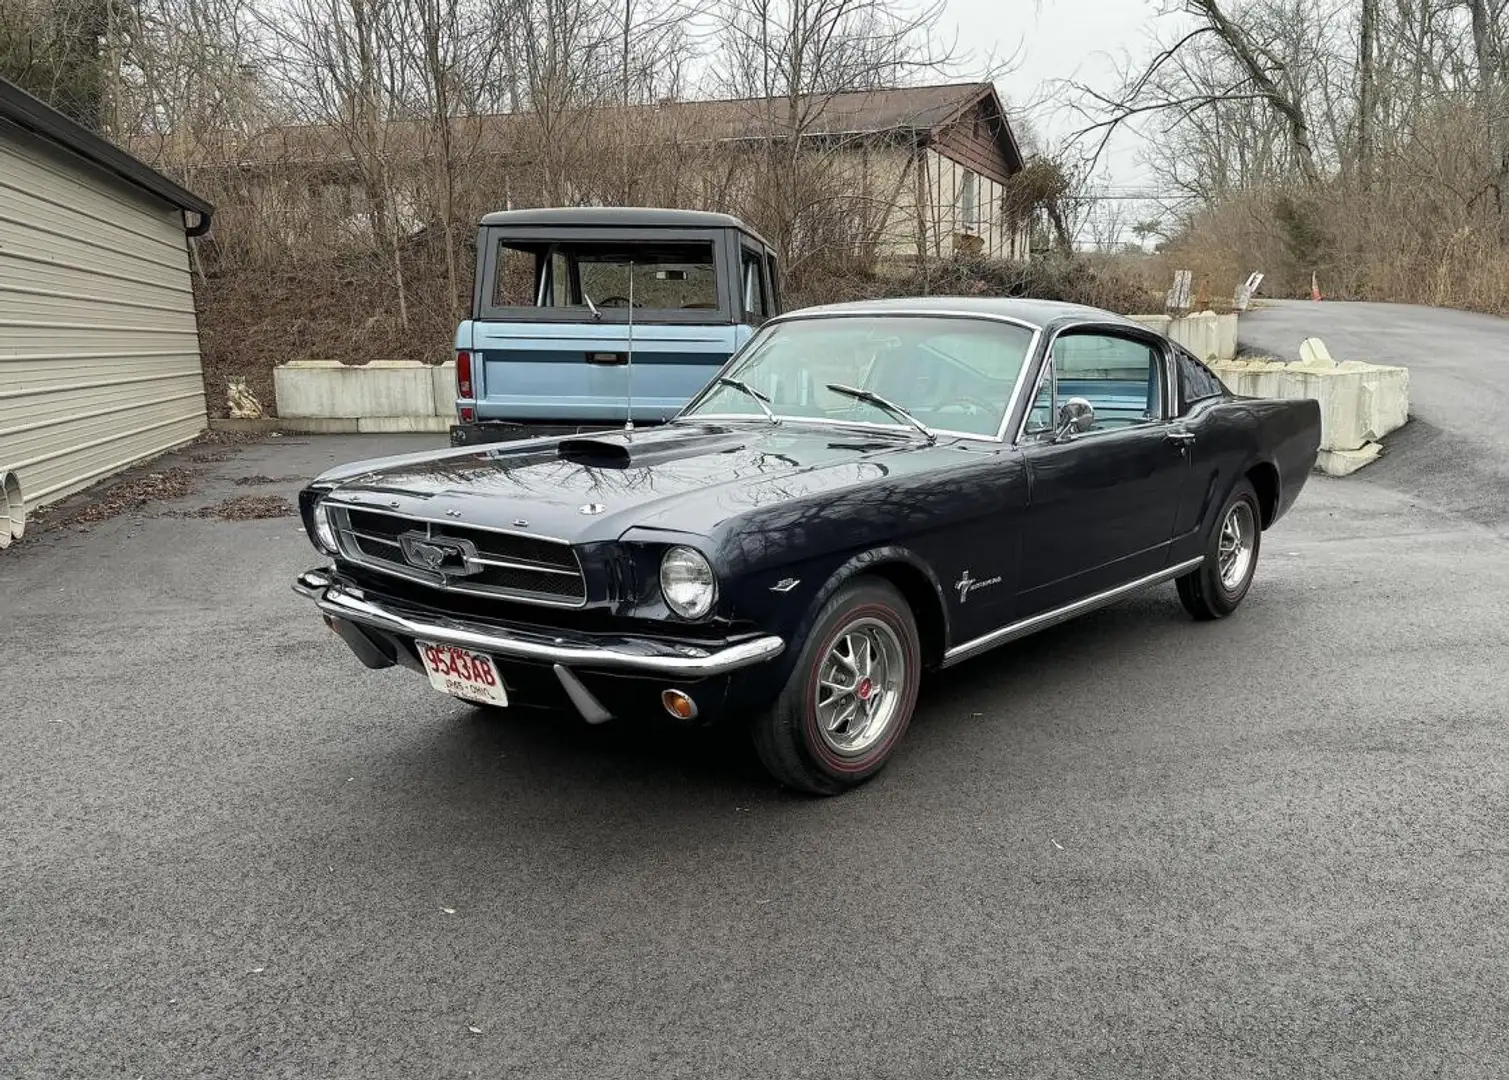 Ford Mustang FASTBACK C-CODE 289 - 1